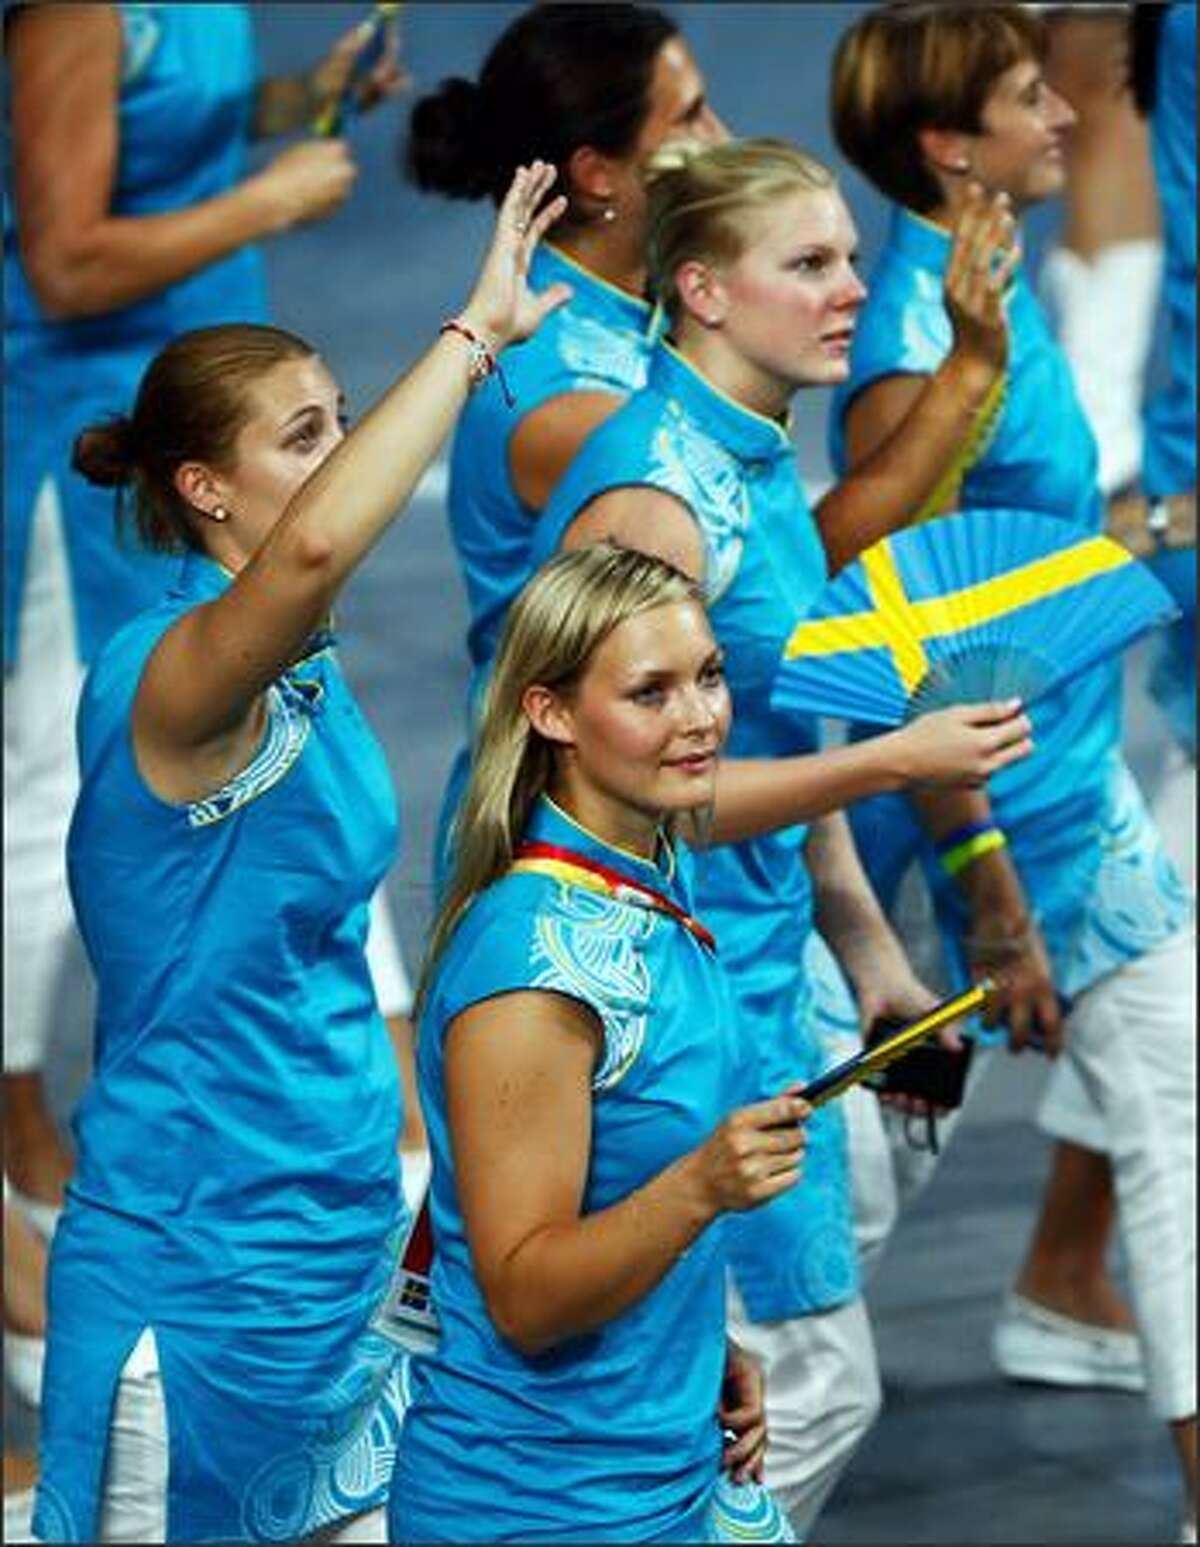 Swedish athletes enter the stadium during the Opening Ceremony for the 2008 Beijing Summer Olympics at the National Stadium on August 8, 2008 in Beijing, China. (Photo by Cameron Spencer/Getty Images)